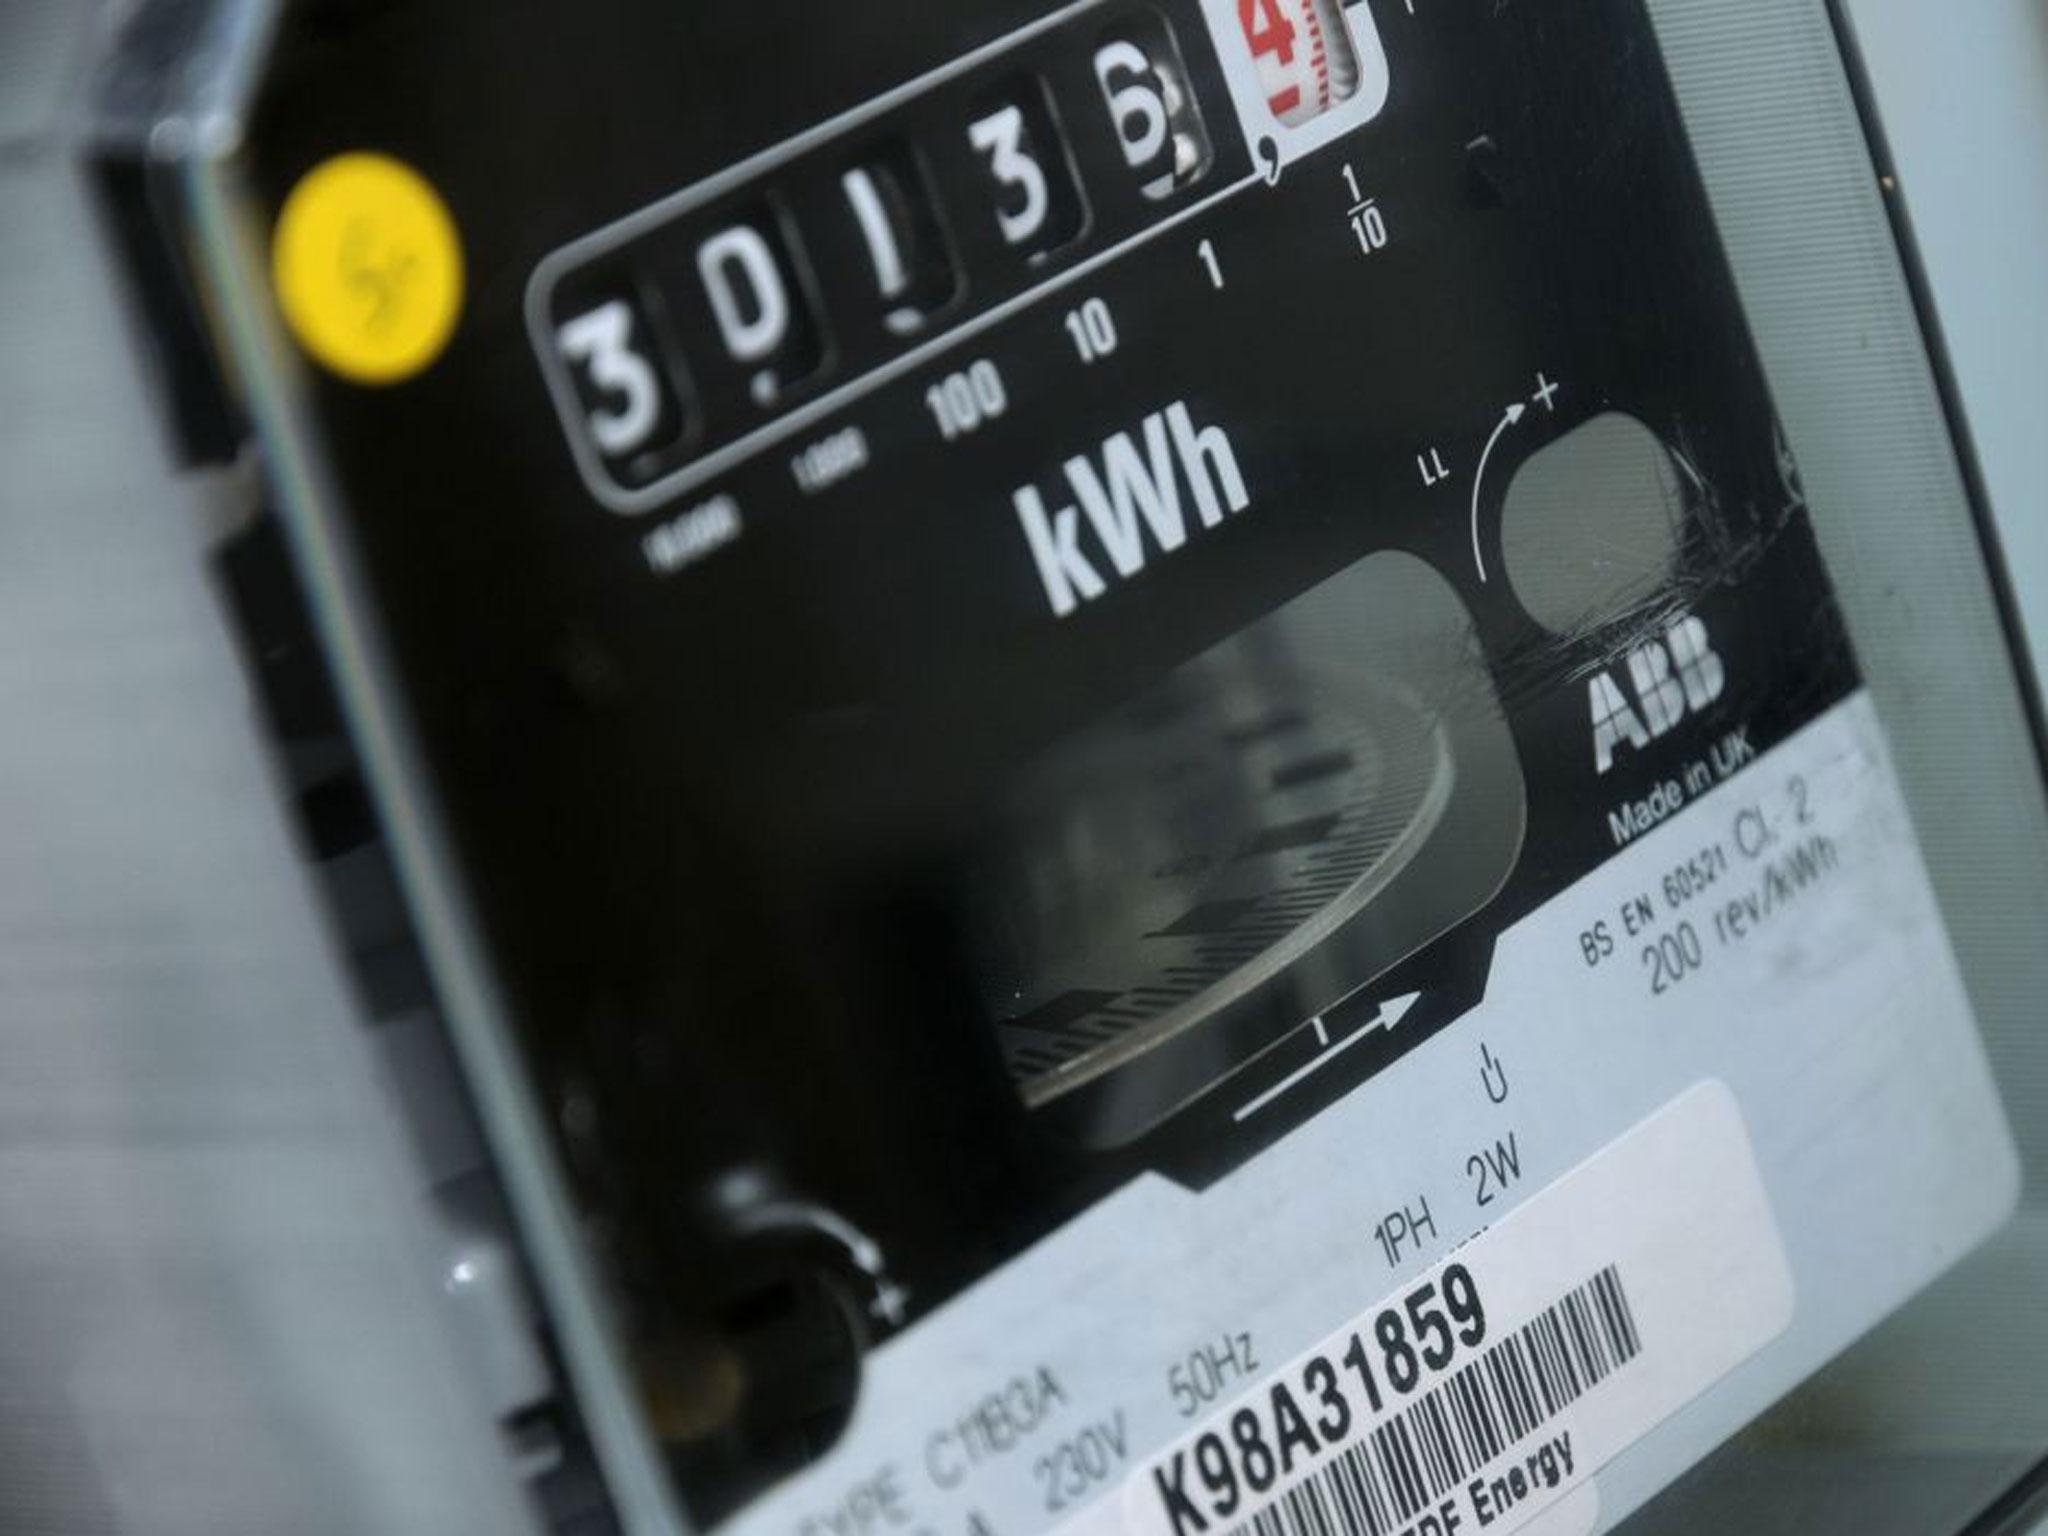 Energy companies have been accused of exploiting customers and acting uncompetitively